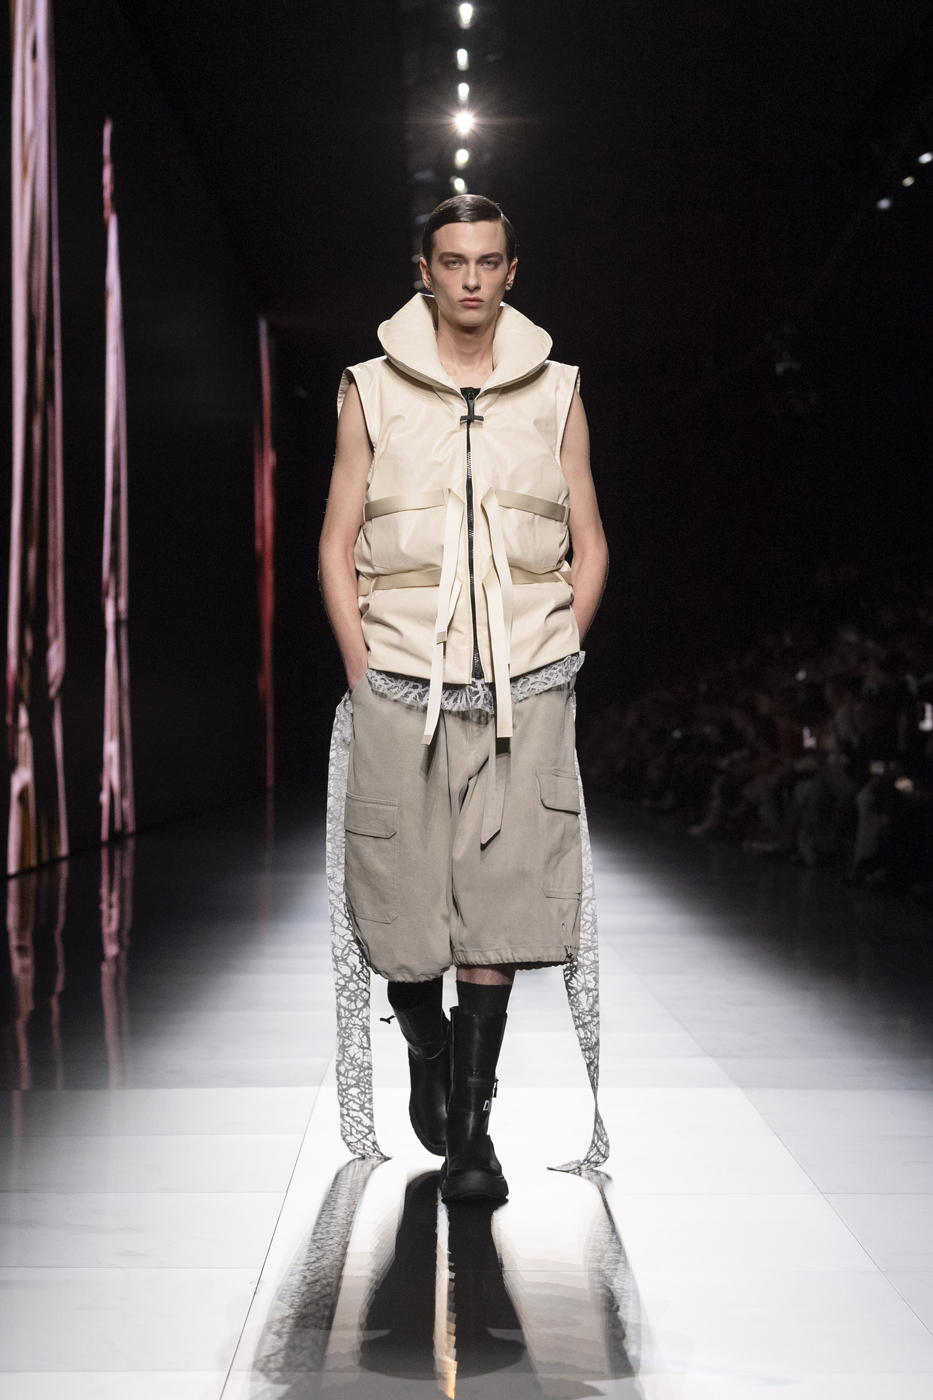 Skirt-Wearing Robert Pattinson Bookended Dior FW23